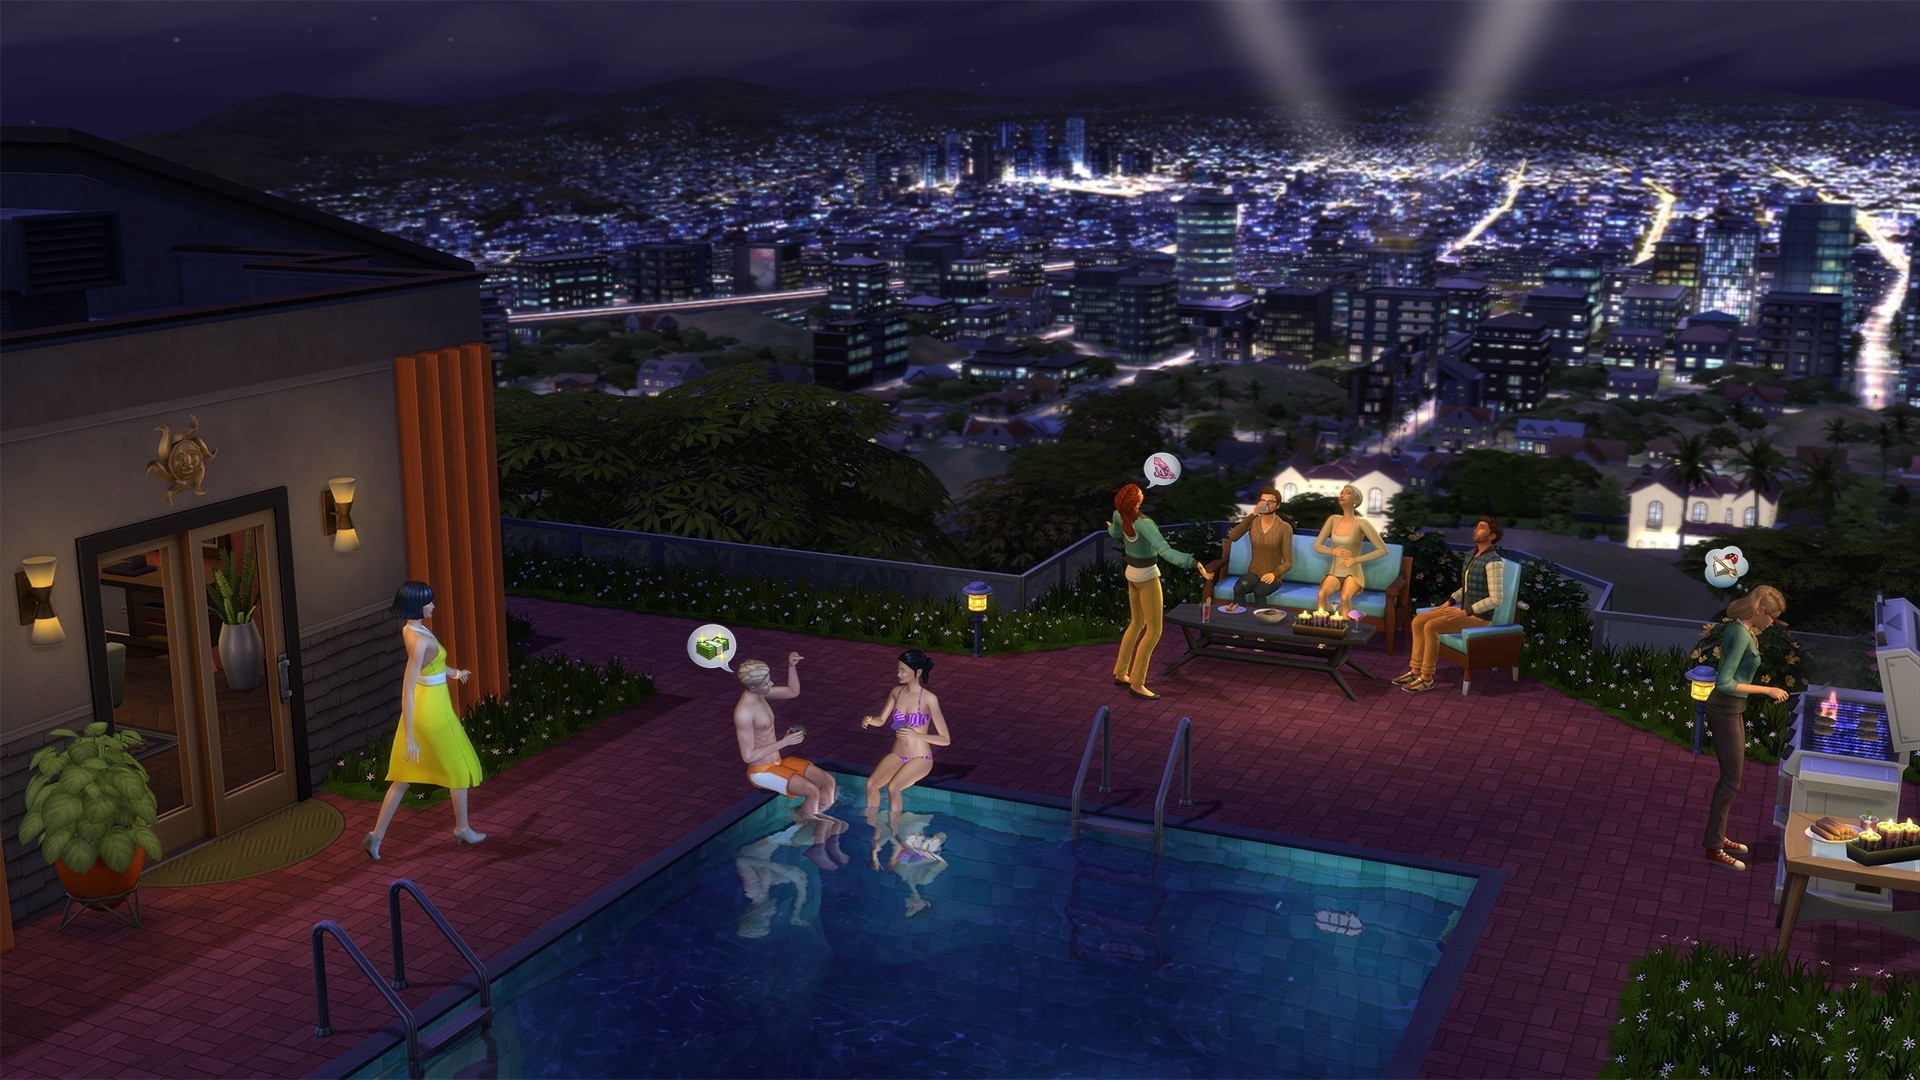 Sims 4 iso download full